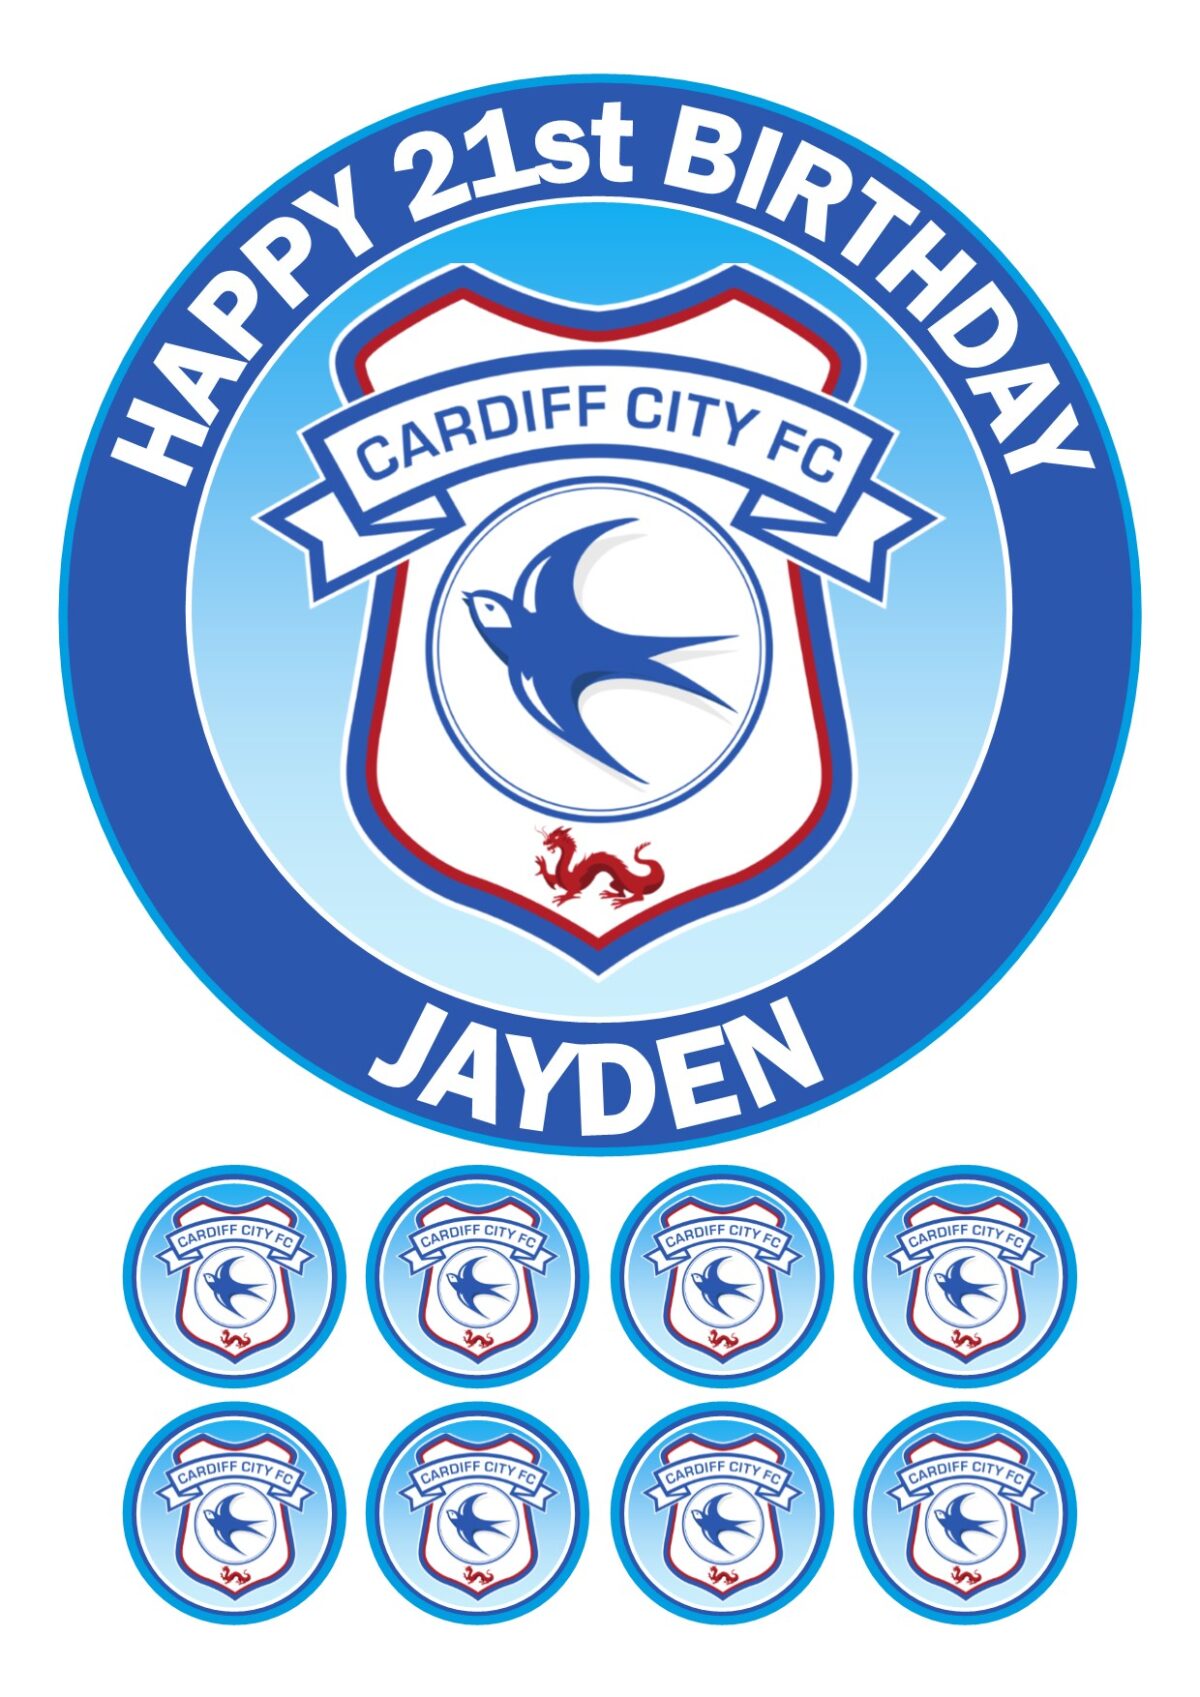 cardiff city ICING BIRTHDAY CAKE TOPPER